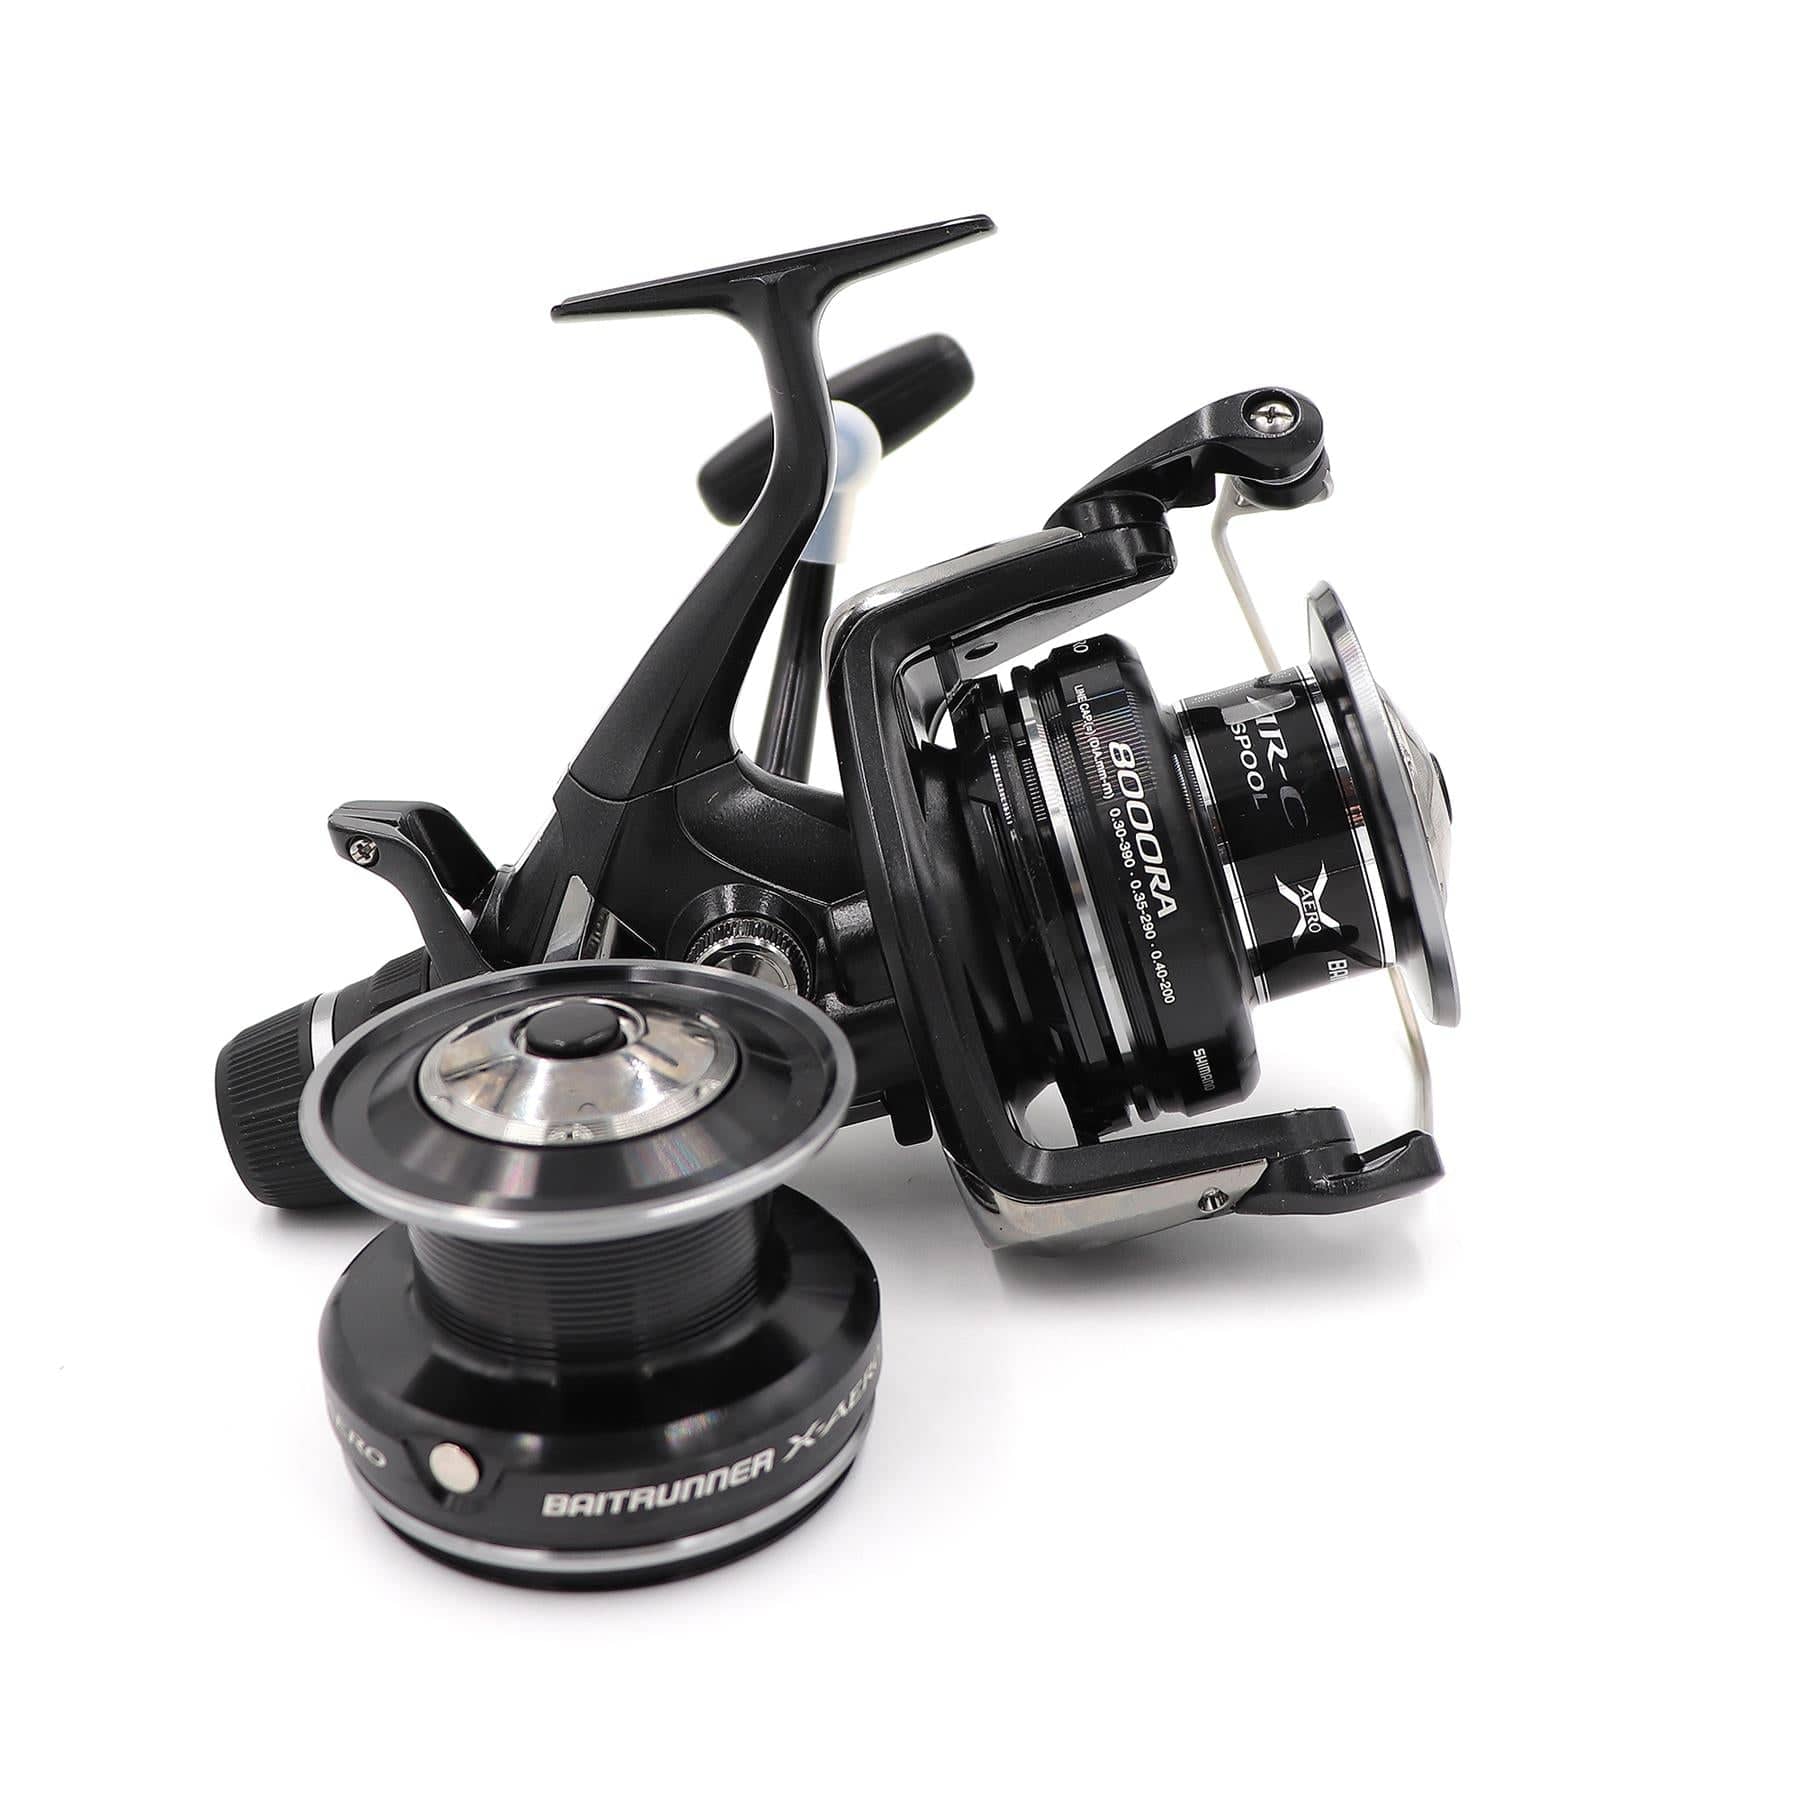 BOXED – SHIMANO AERO SYMETRE 2000 FIXED SPOOL/SPINNING REEL + 2 x SPARE  SPOOLS